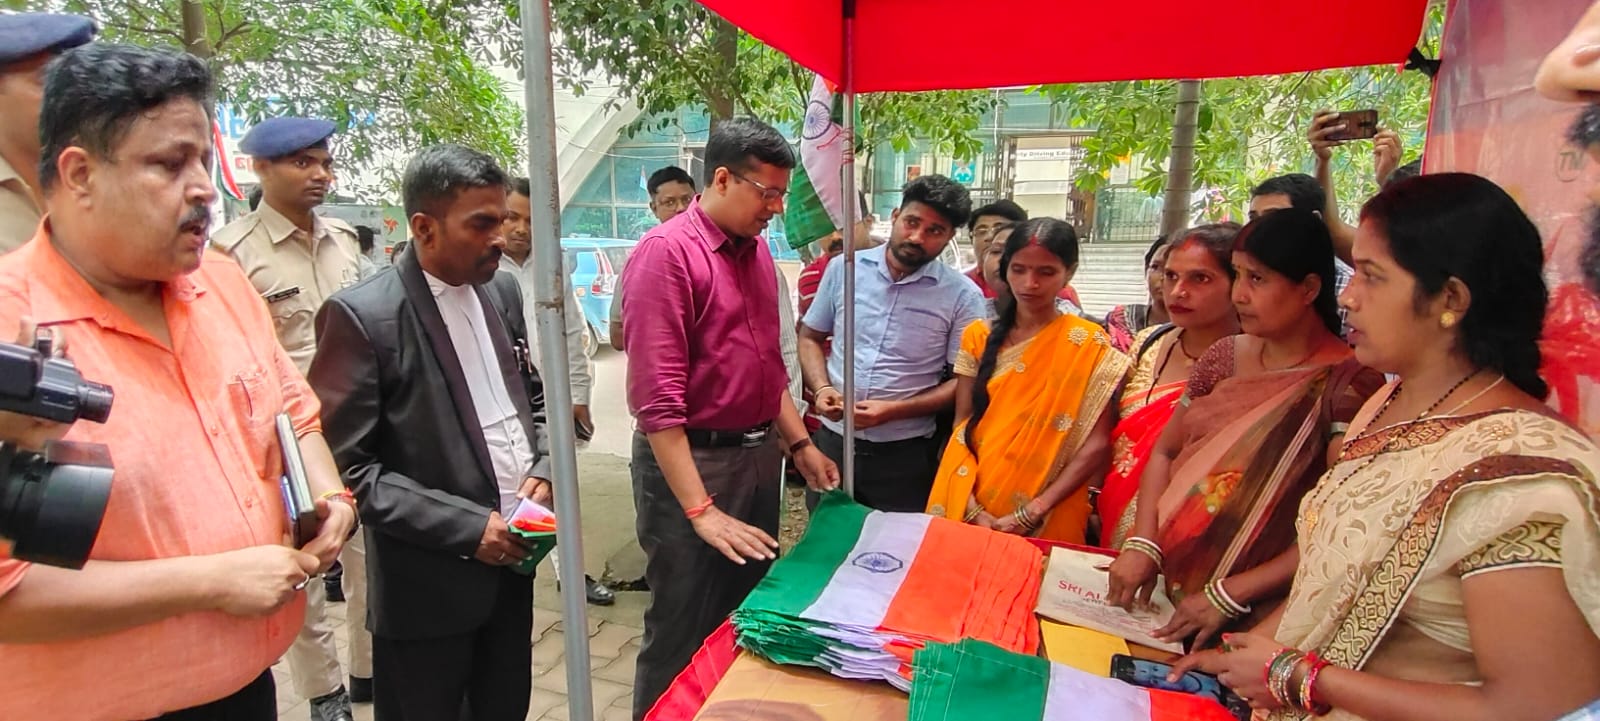 Ranchi residents can get the flag by giving 20 rupees cooperation amount